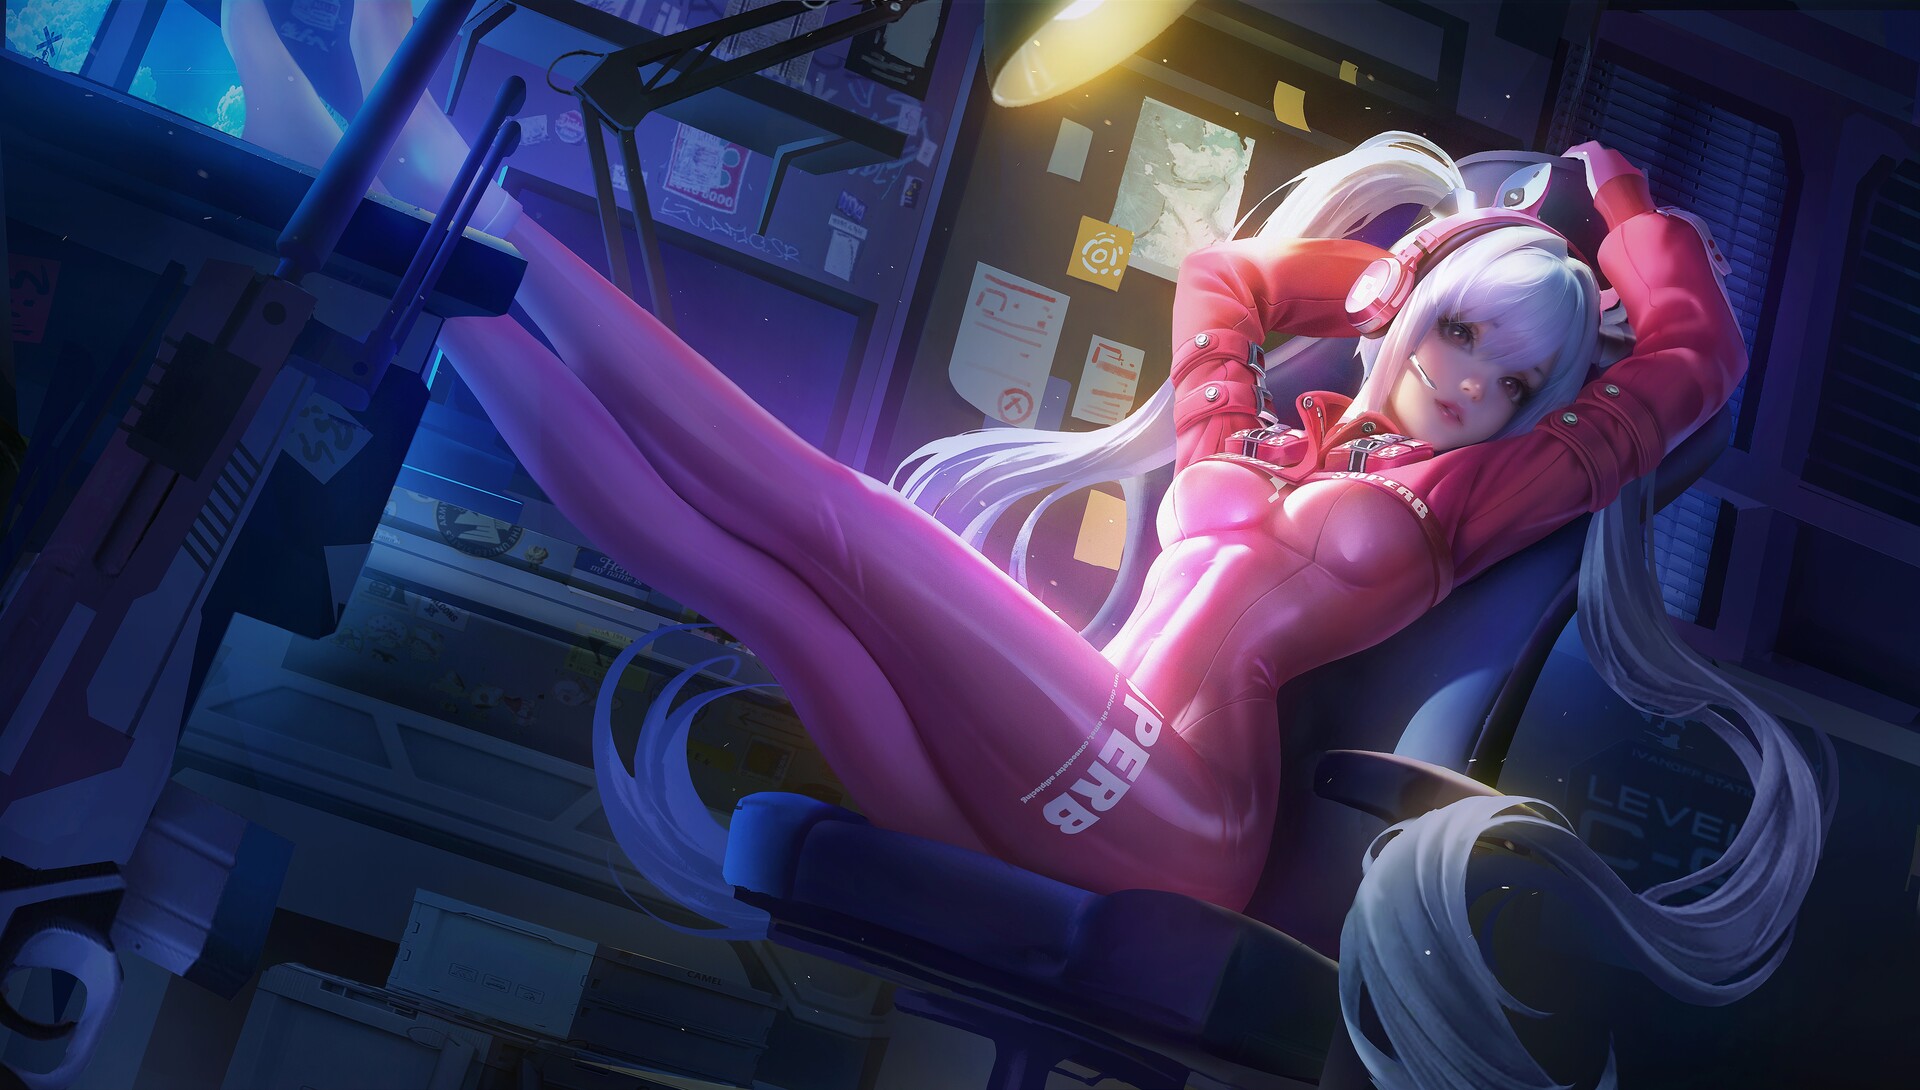 Anime 1920x1090 Mr Xior drawing Nikke: The Goddess of Victory Alice (Nikke) silver hair twintails pink clothing legs desk lamp anime girls white hair bodysuit chair headphones